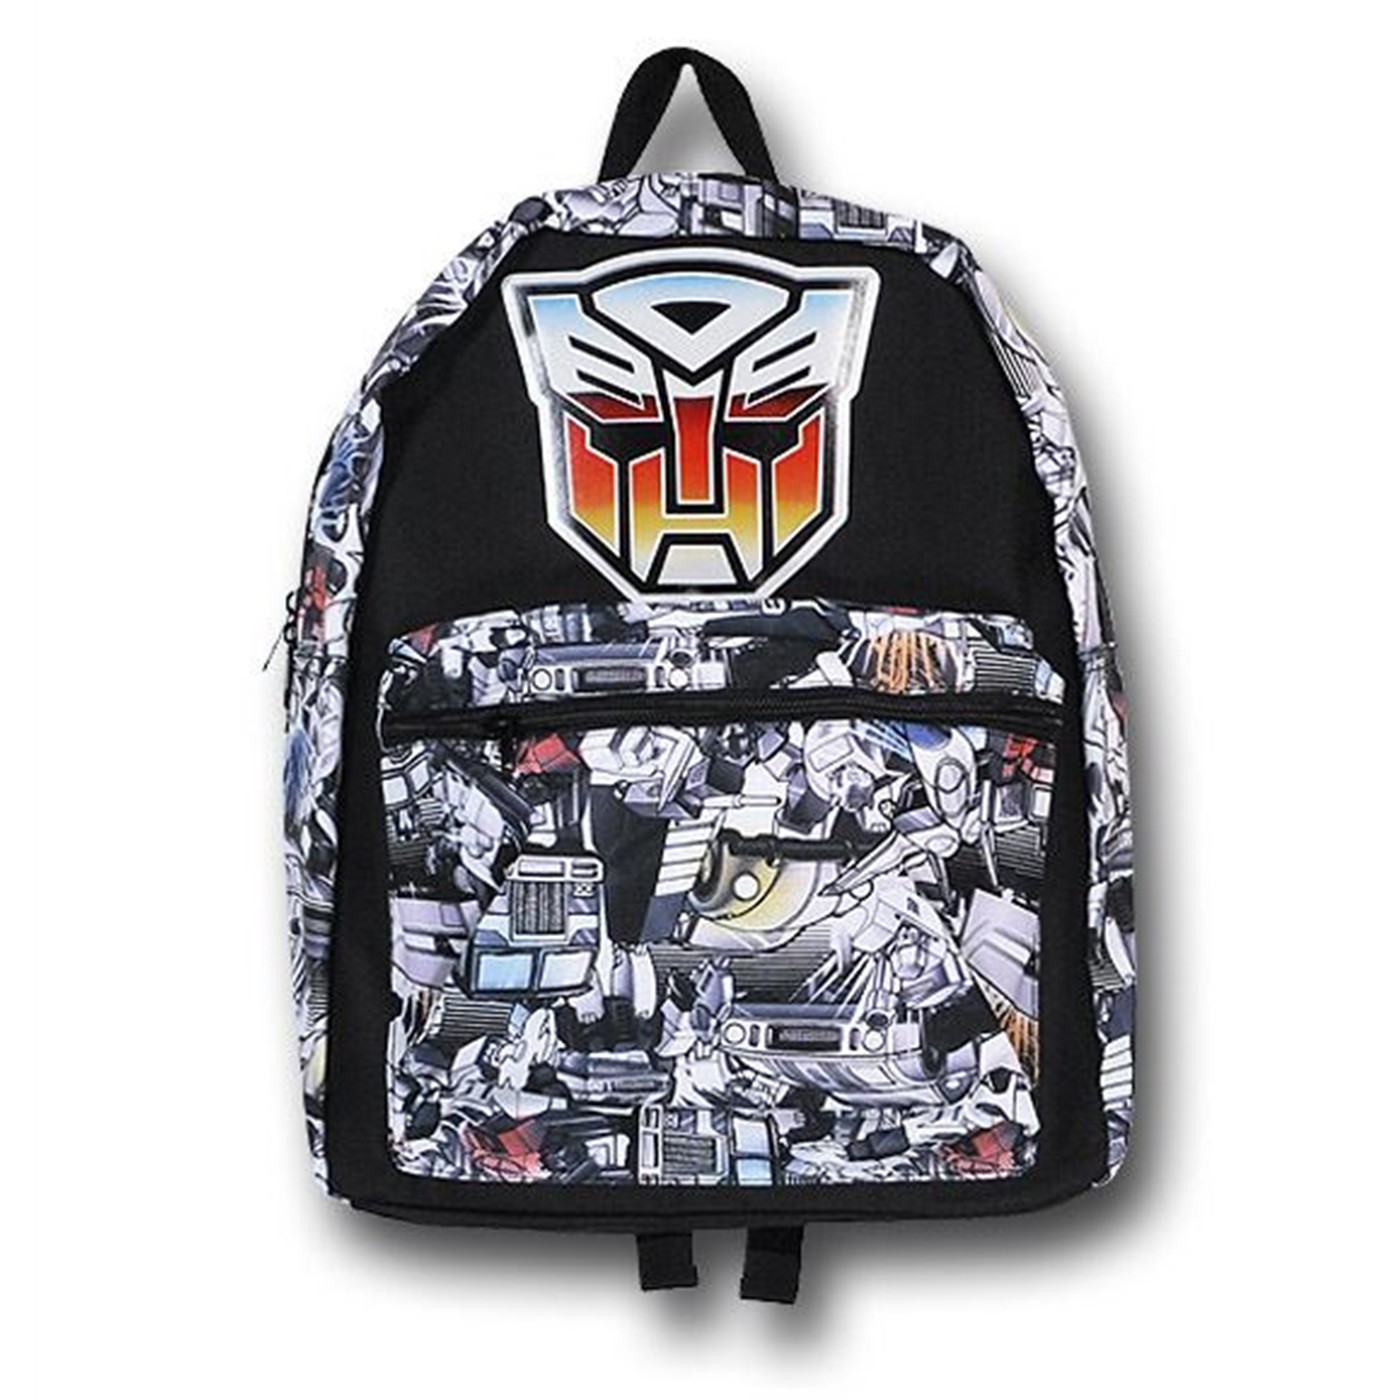 Part Piece Transformers Autobot Jeep Roadbuster Back Pack Backpack Outer 